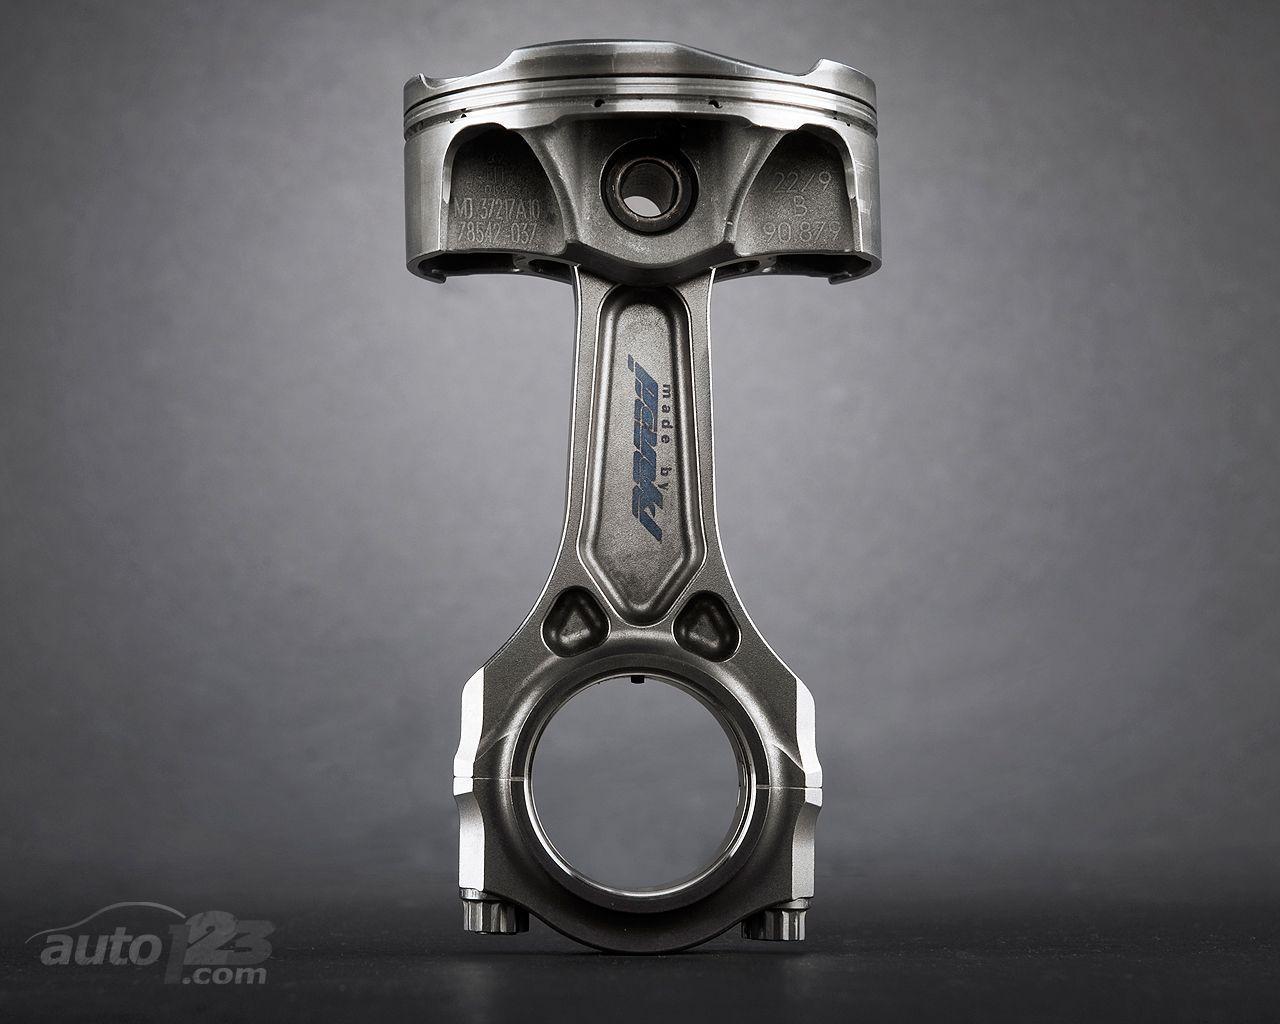 Piston Wallpaper. Wide Wallpaper Collections